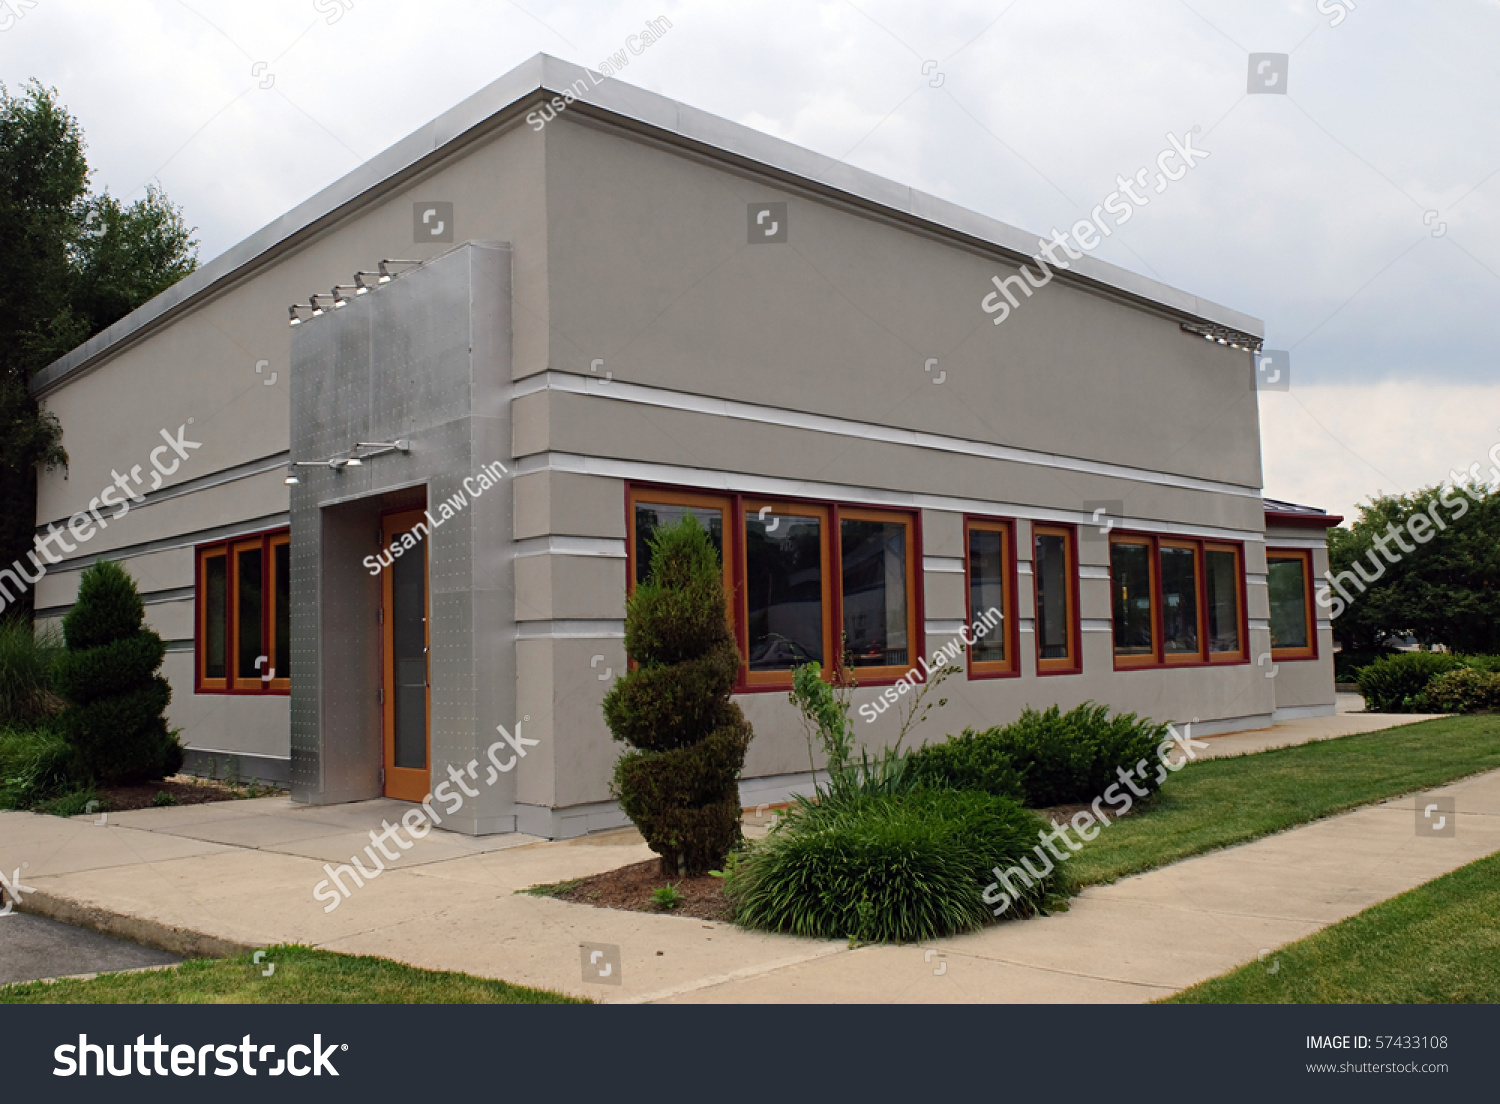 Small Business Building #57433108